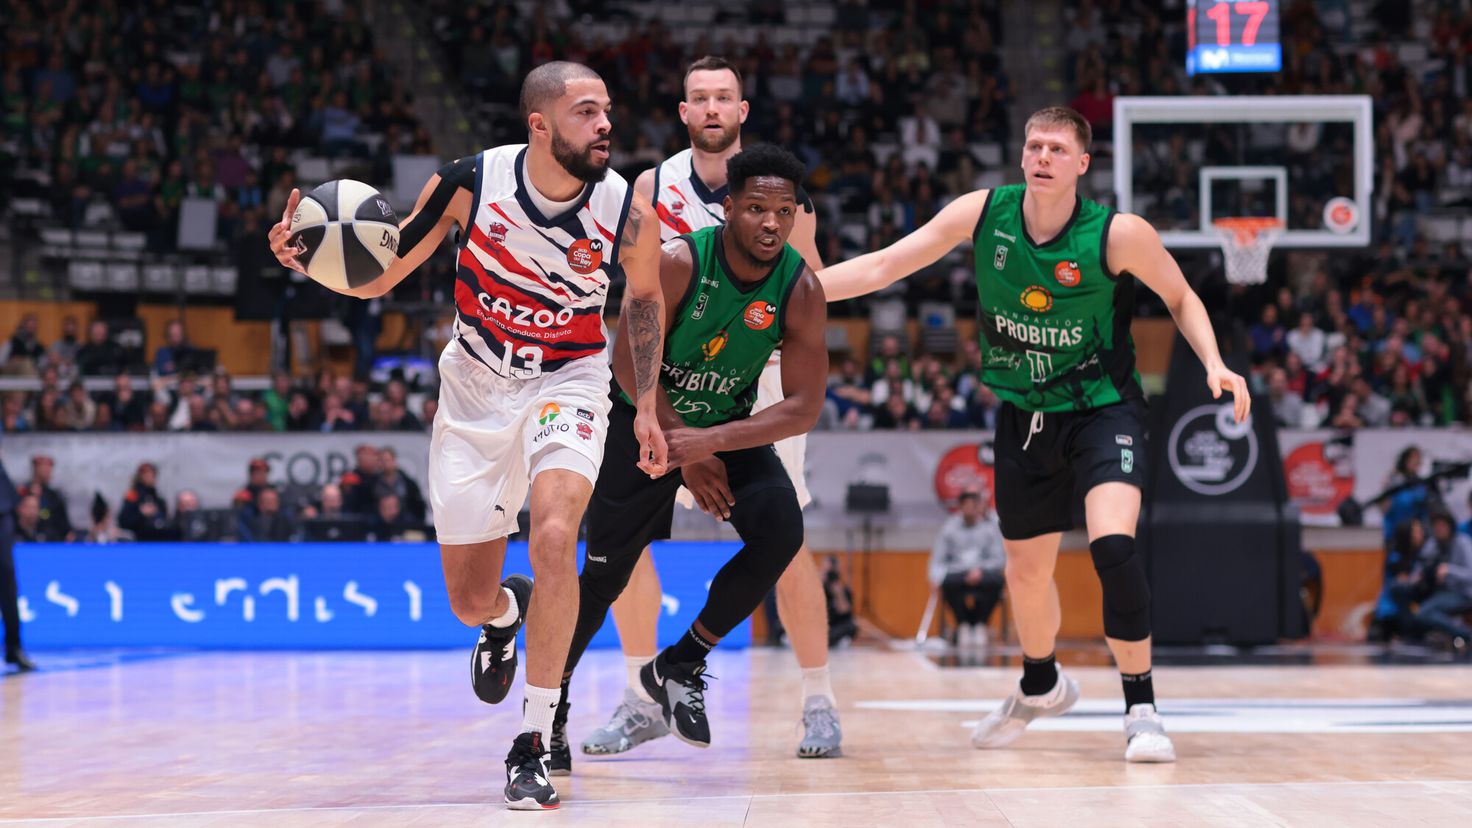 Baskonia and Penya meet again after the Cup
